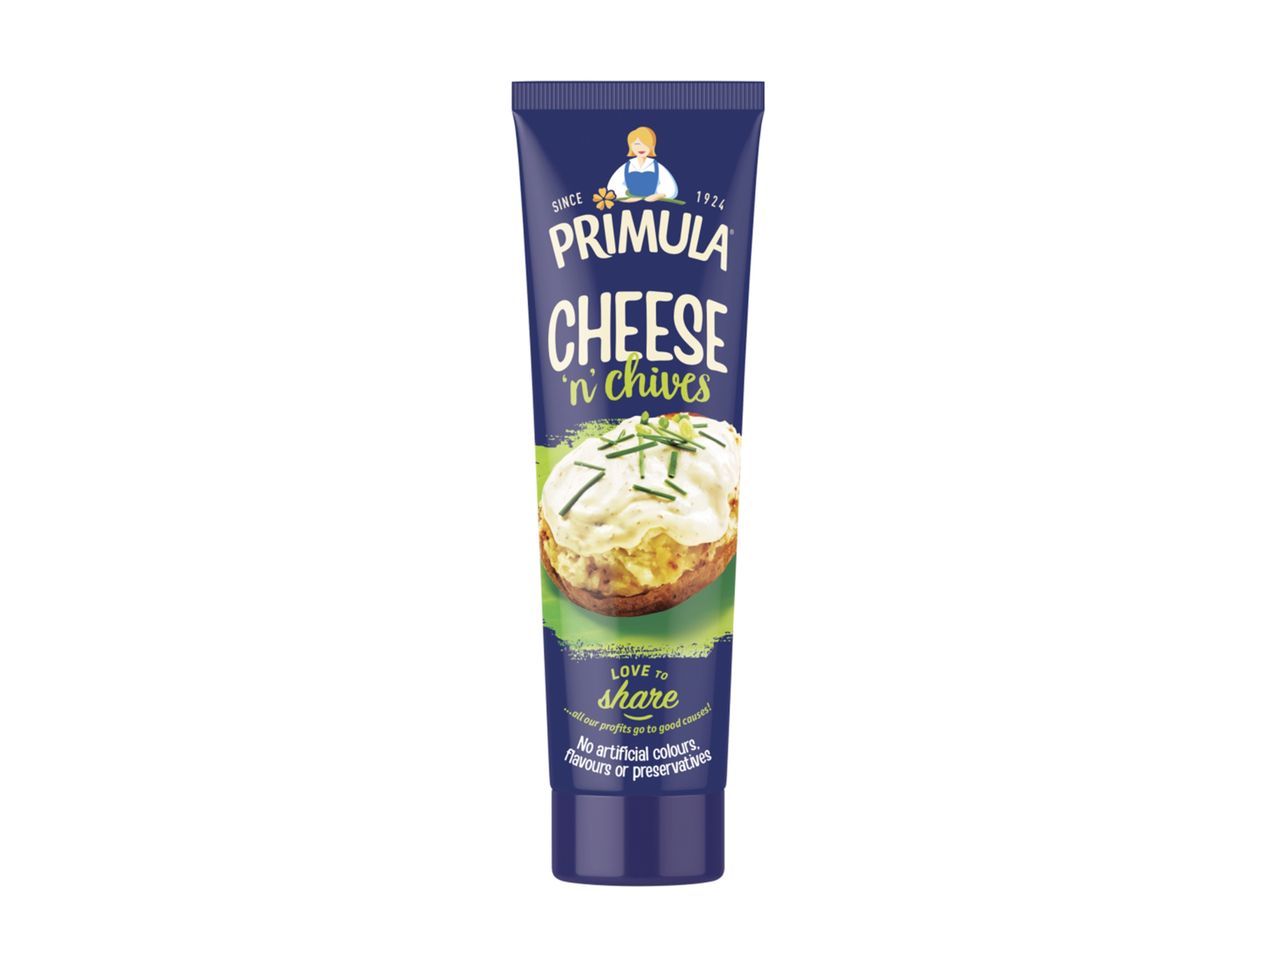 Go to full screen view: Primula Cheese - Image 1